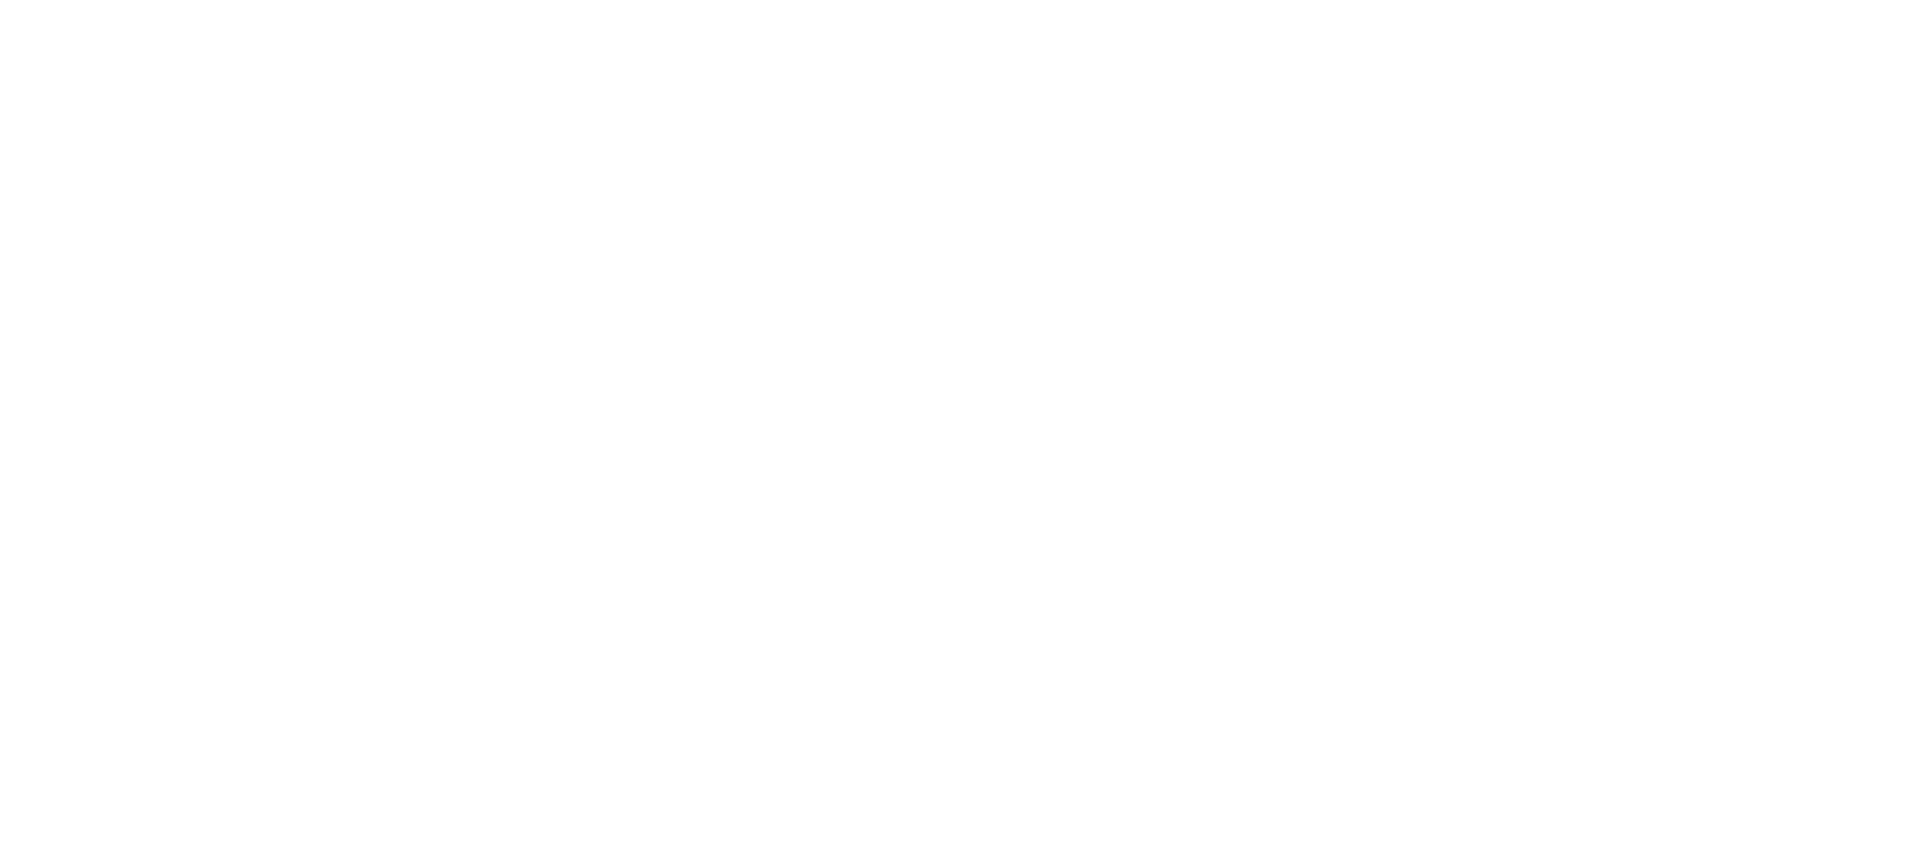 Alexander, the Servant and the Water of Life. The 21st century Alexander Romance